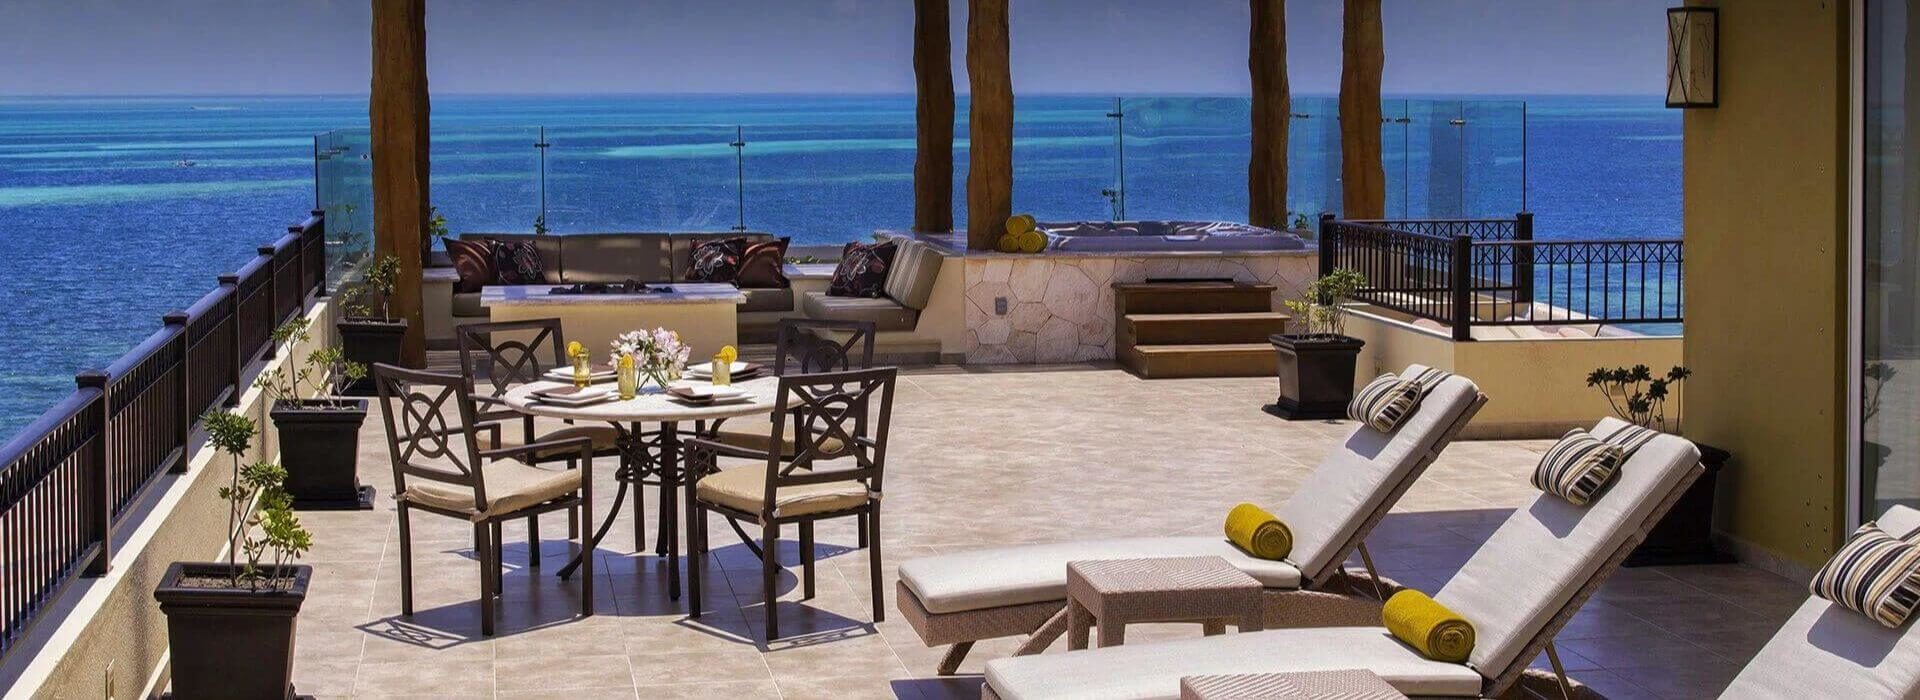 A spacious terrace with lounge chairs, a dining table and chairs, a sitting area with sofas and a fire pit, and a hot tub, and beautiful blue ocean views.